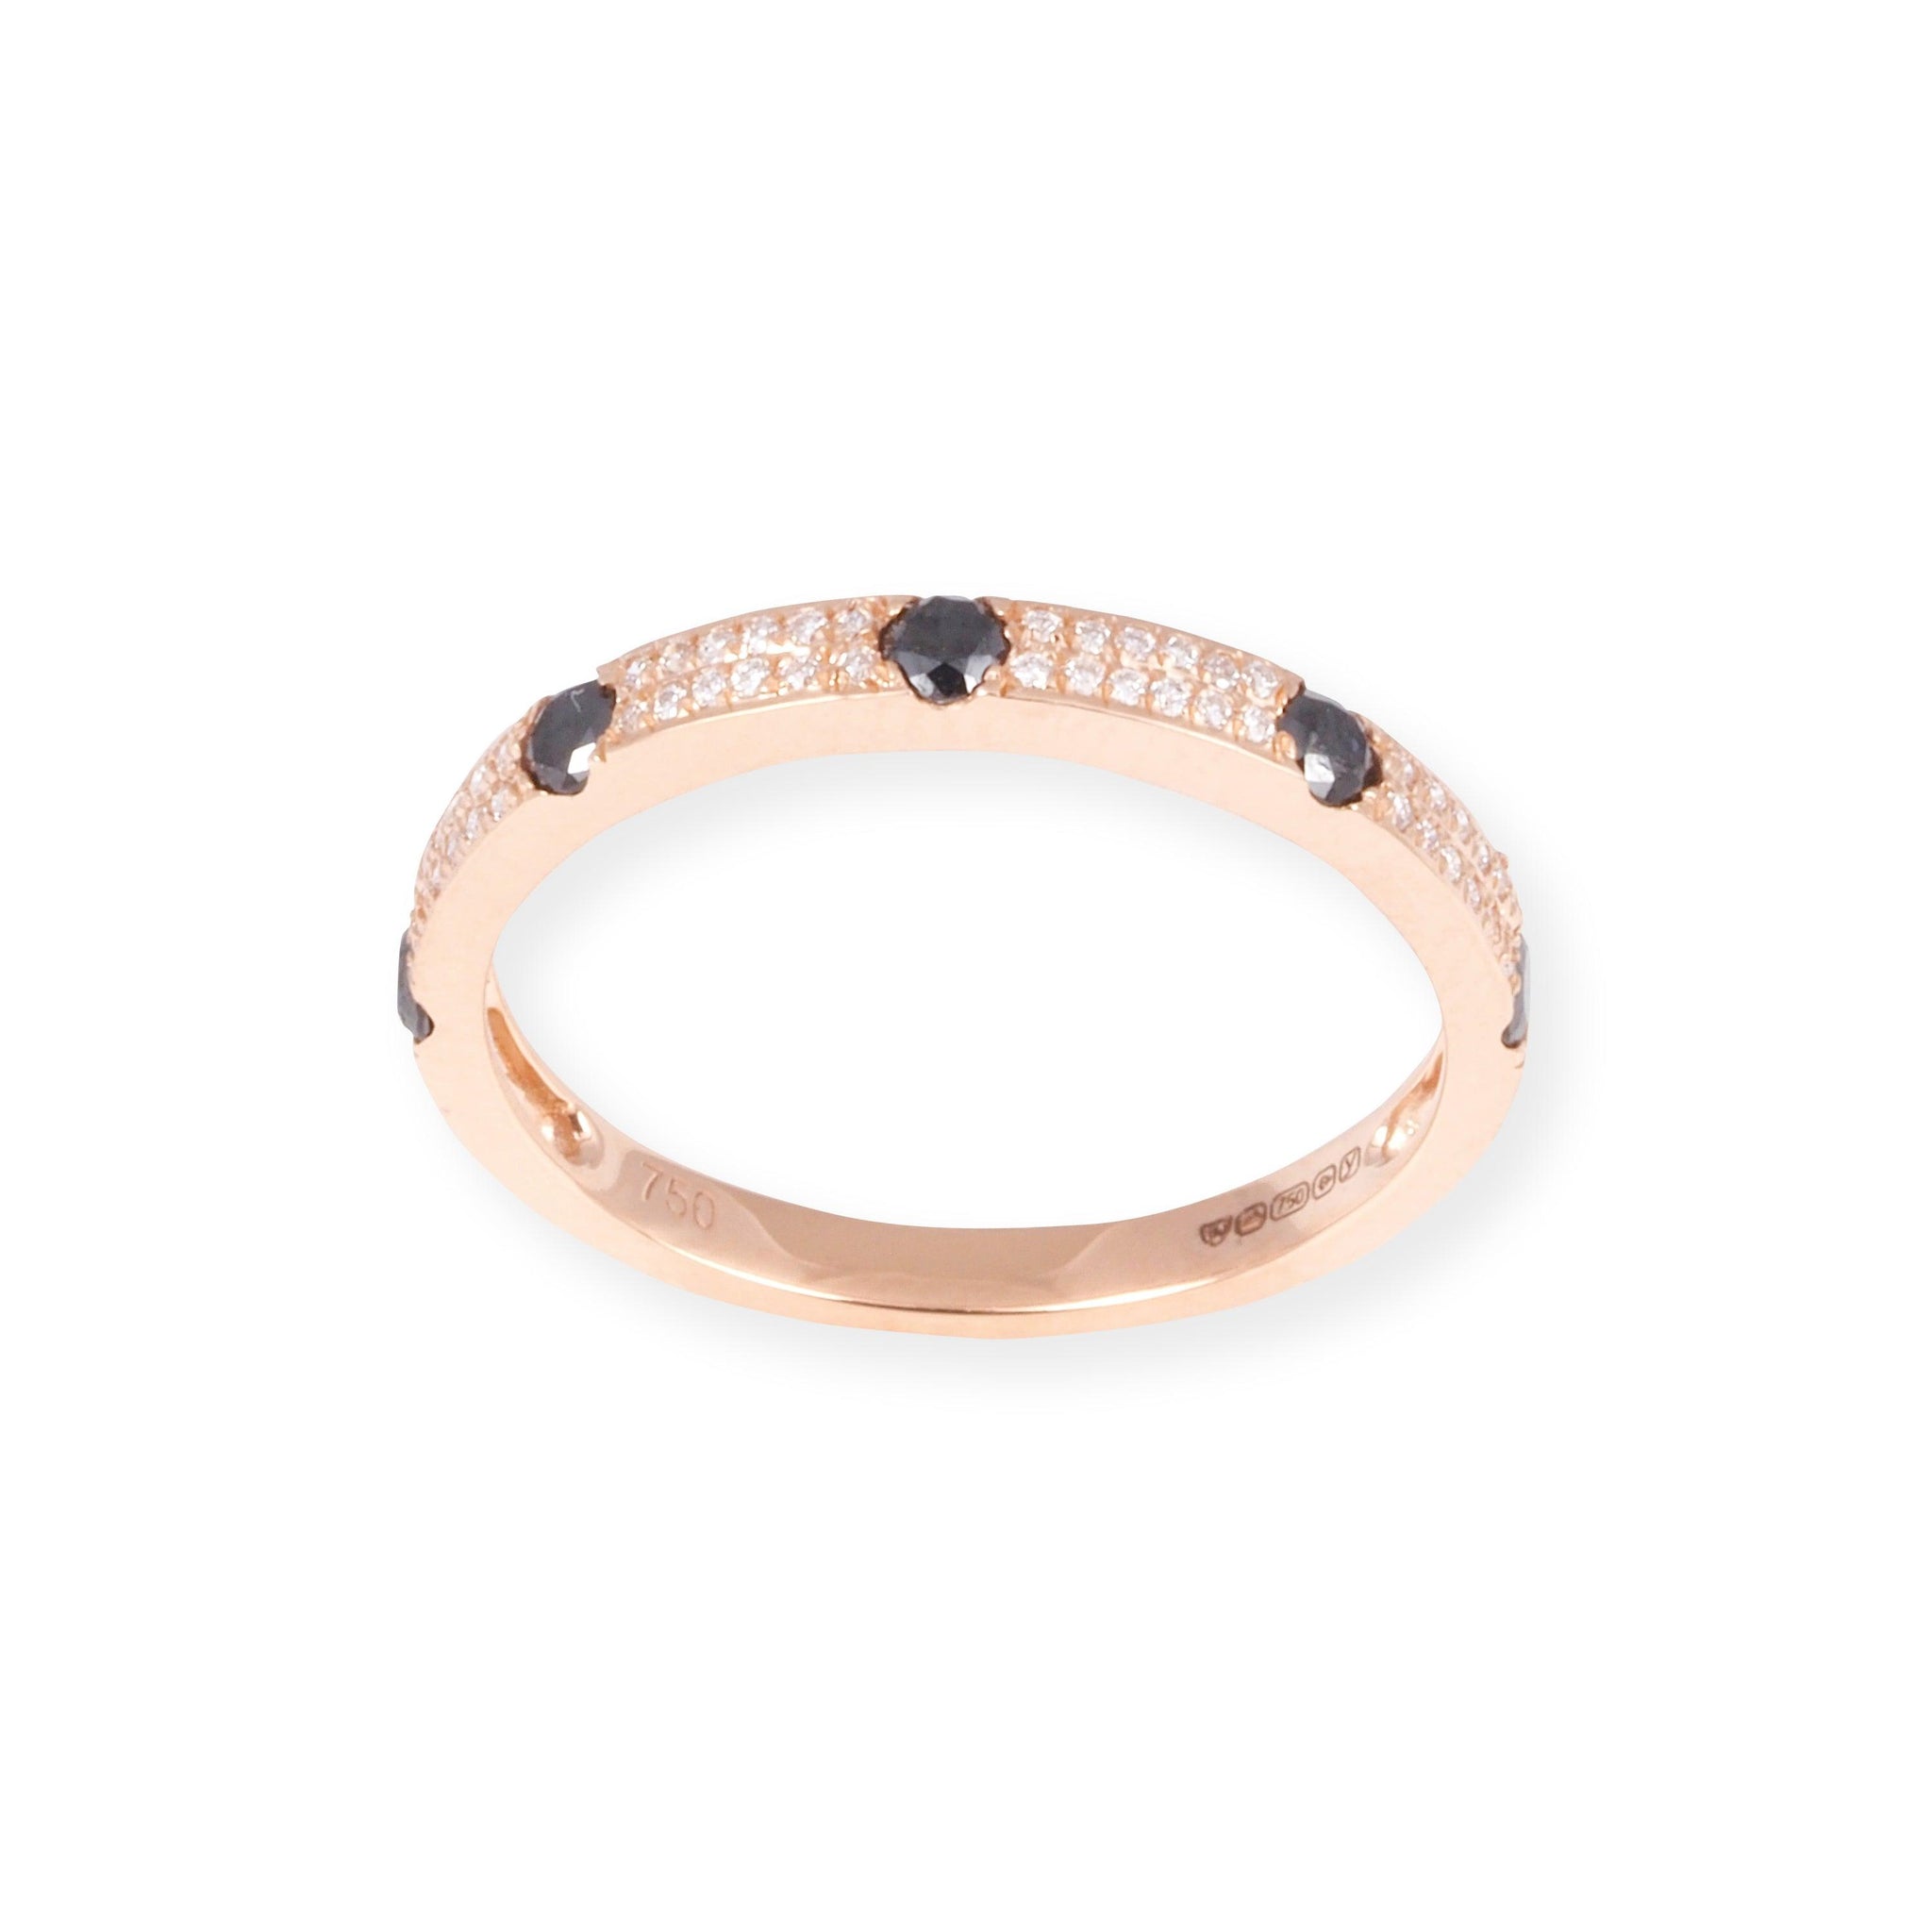 18ct Rose Gold White and Black Diamond Band Ring in Double-Row Pavé Setting LR-7035